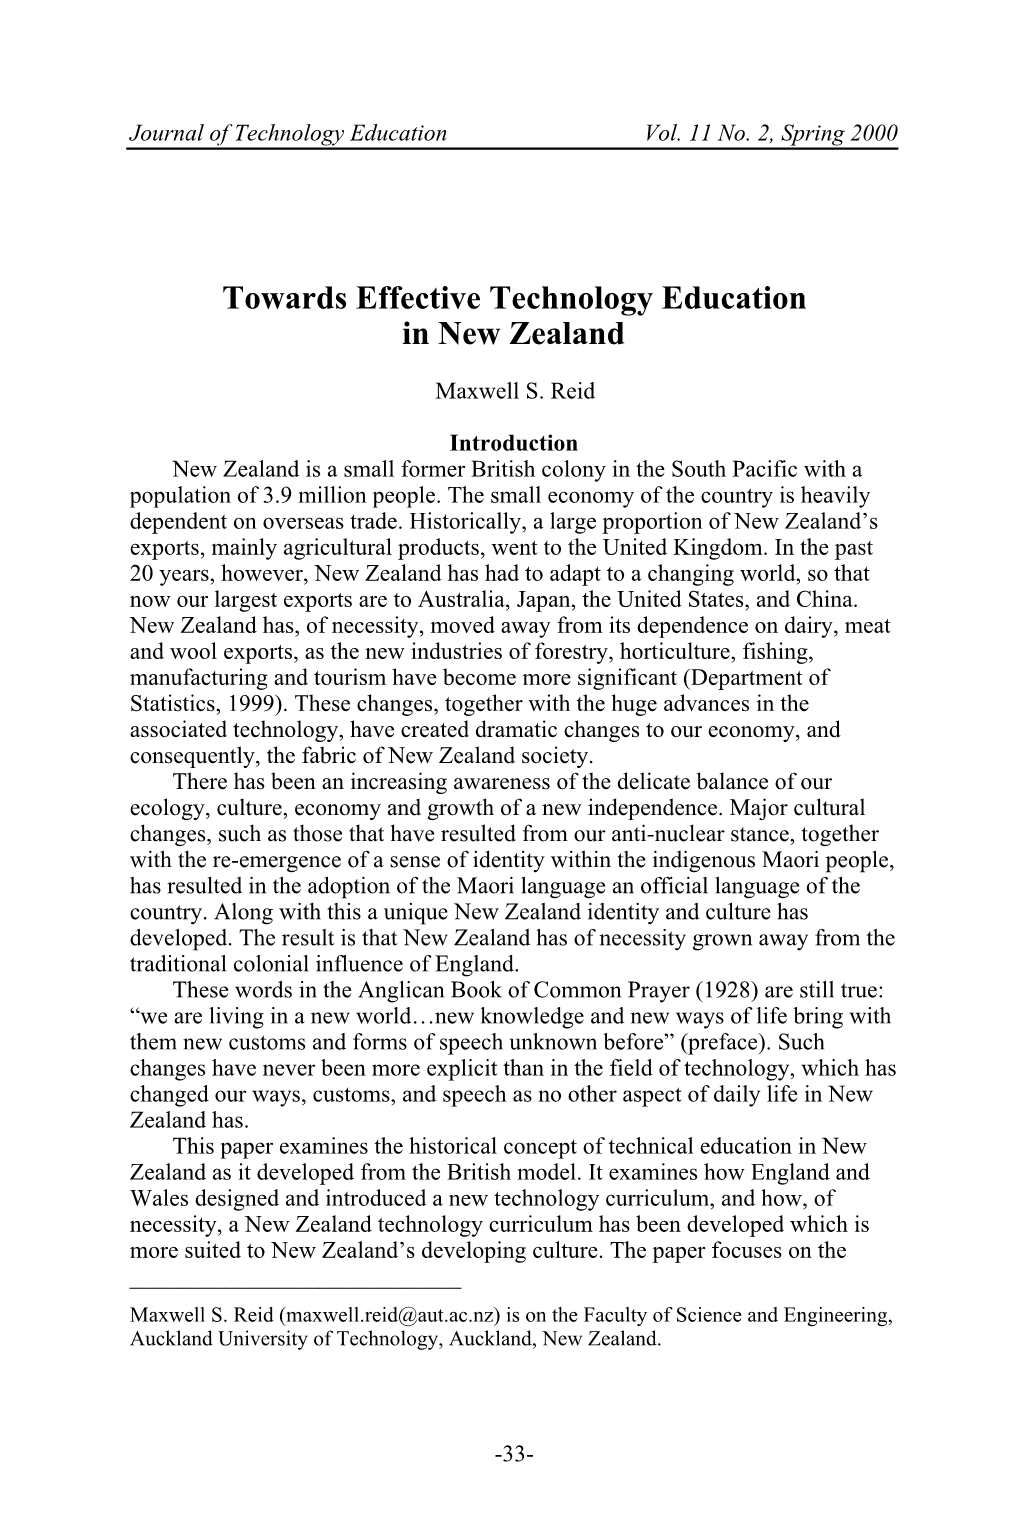 Towards Effective Technology Education in New Zealand